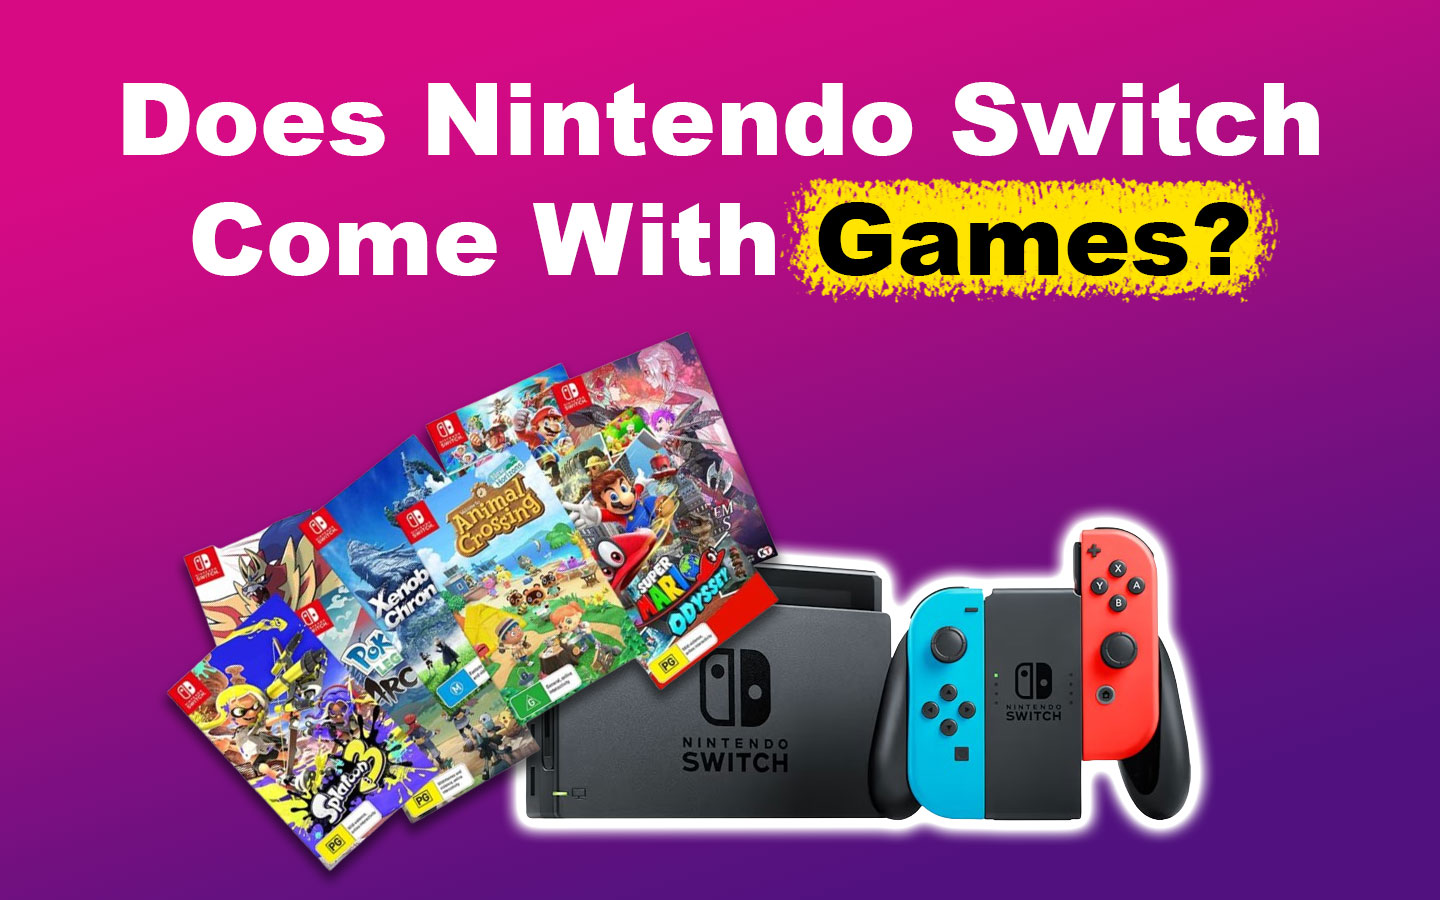 Are Games Included When You Buy a Nintendo Switch? 